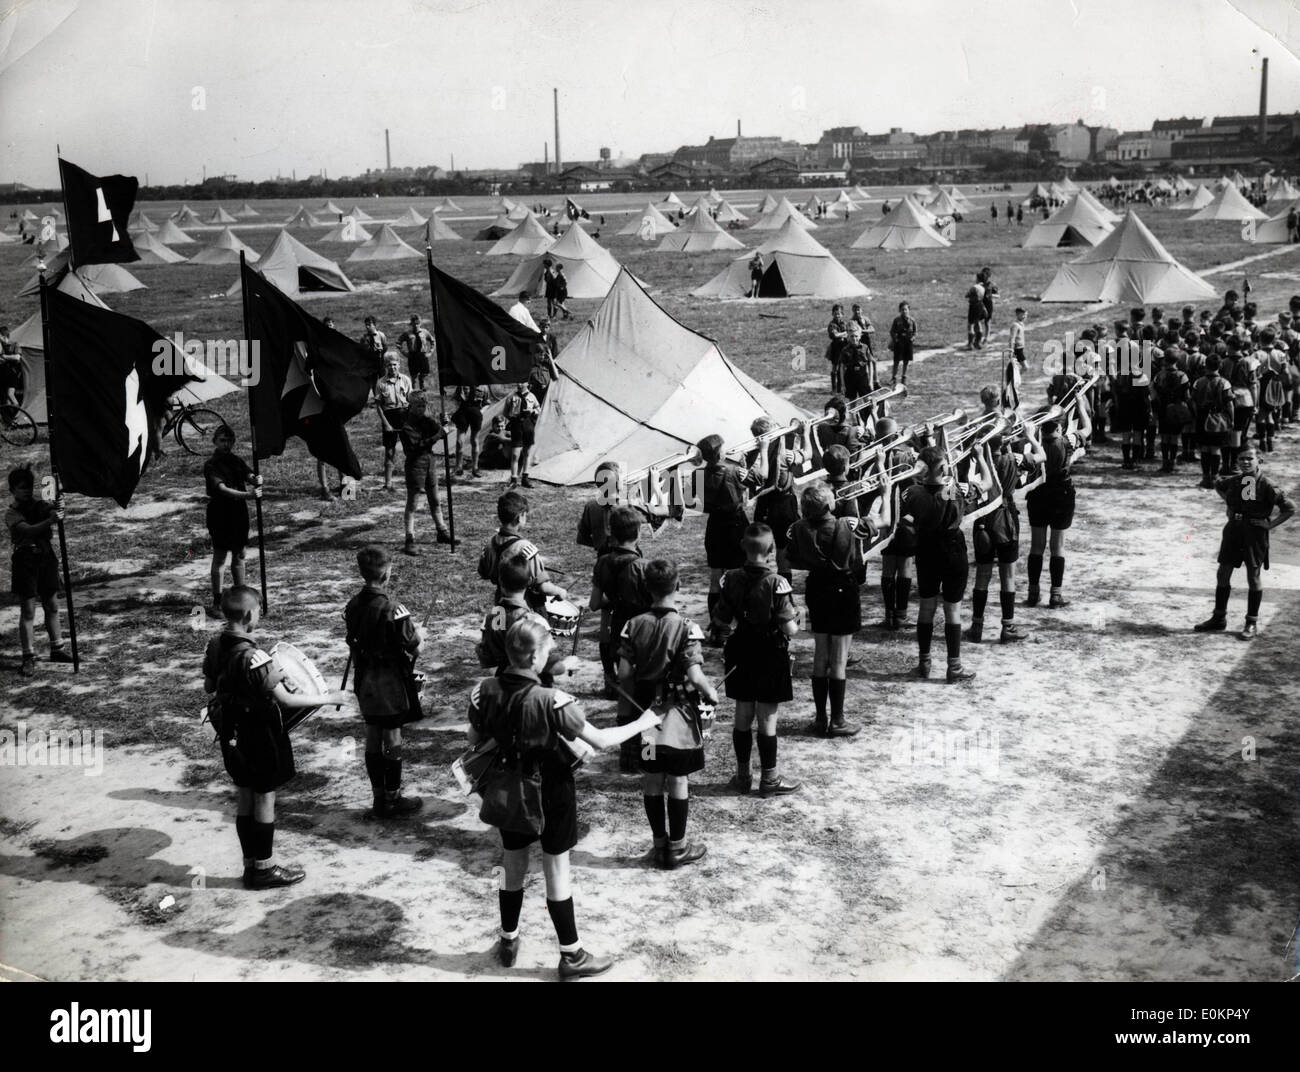 The Hitler Youth camp with 1000 tents Stock Photo